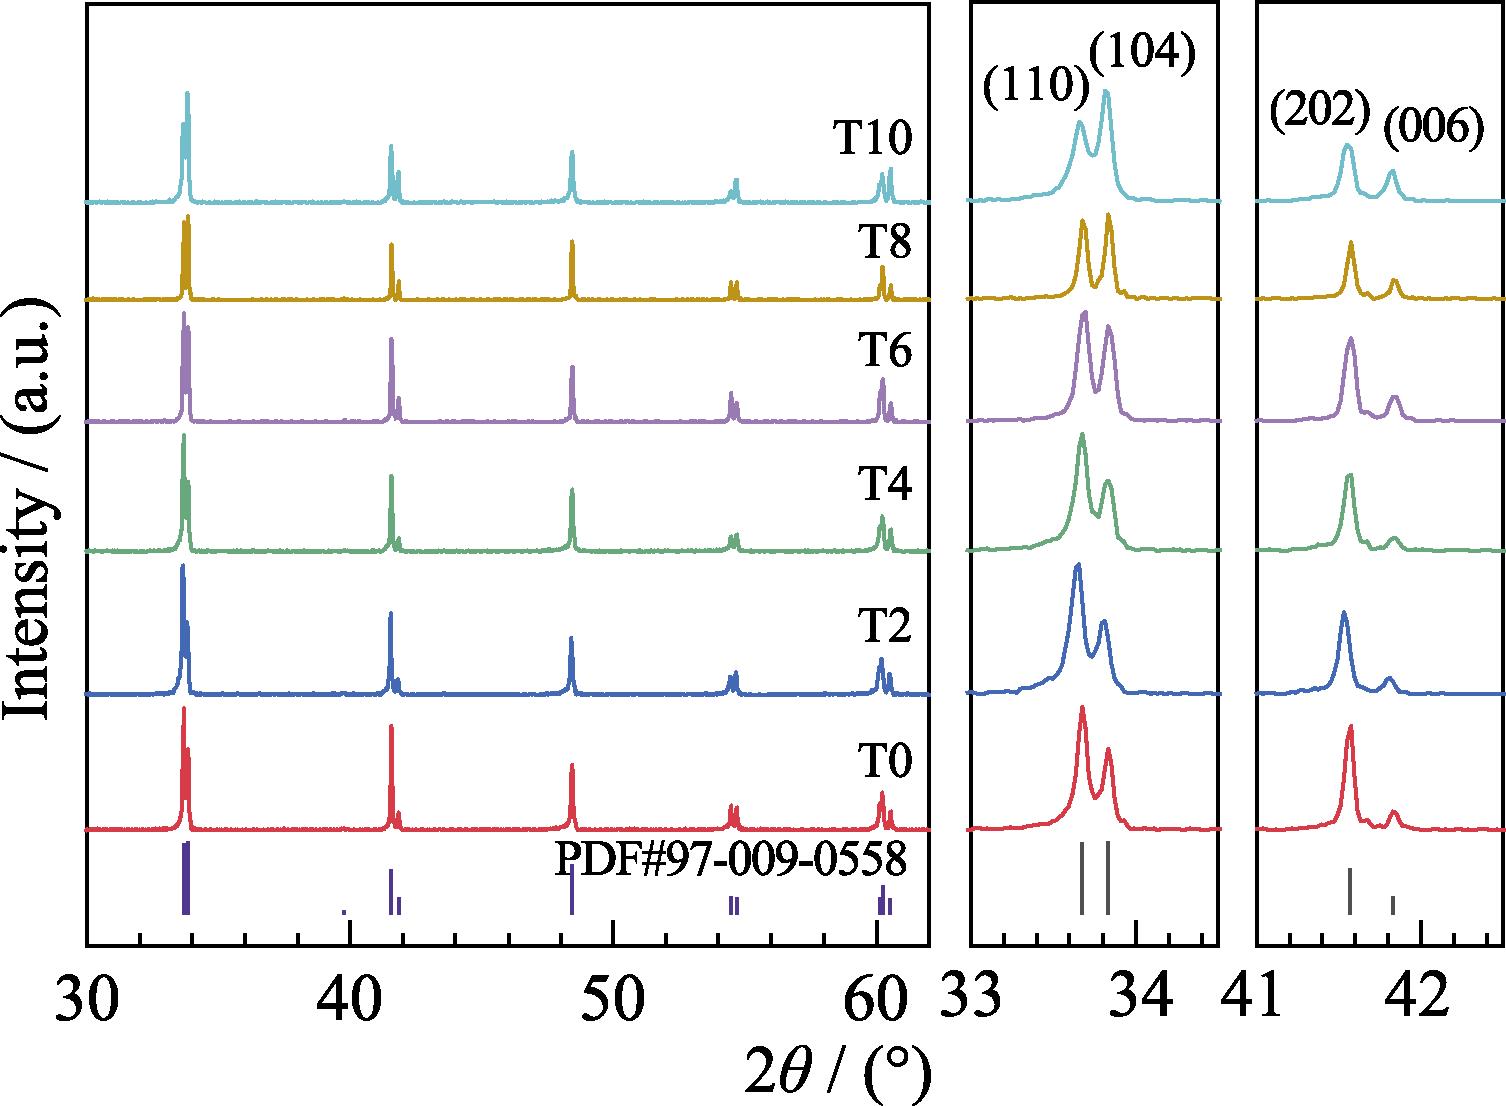 XRD patterns of PrAlO3 ceramics with different TEOS concentrations